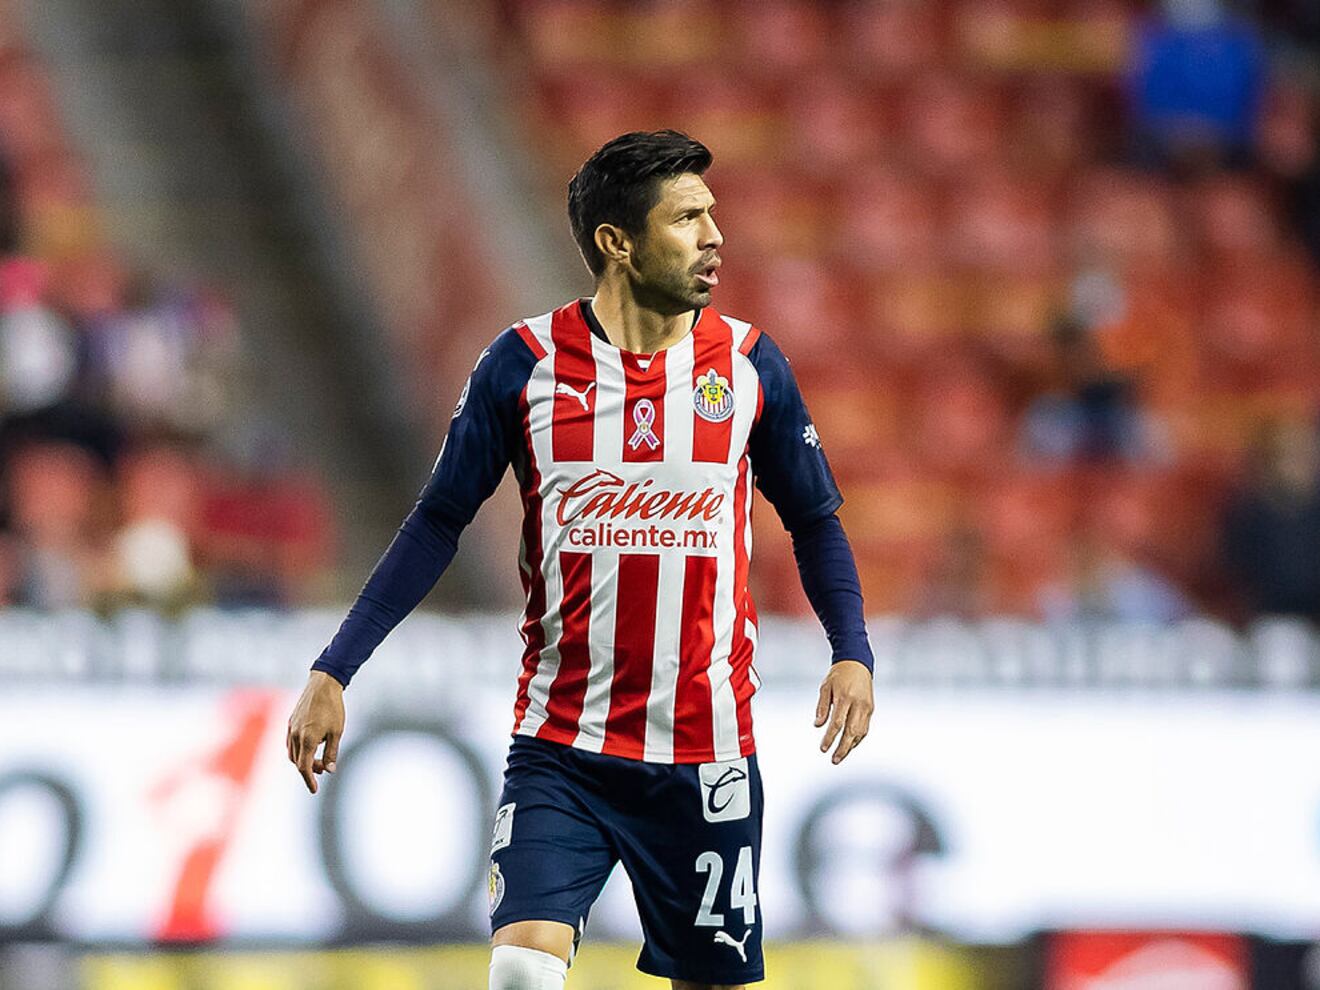 After leaving Chivas no team would sign him and now he’s moving to El Salvador